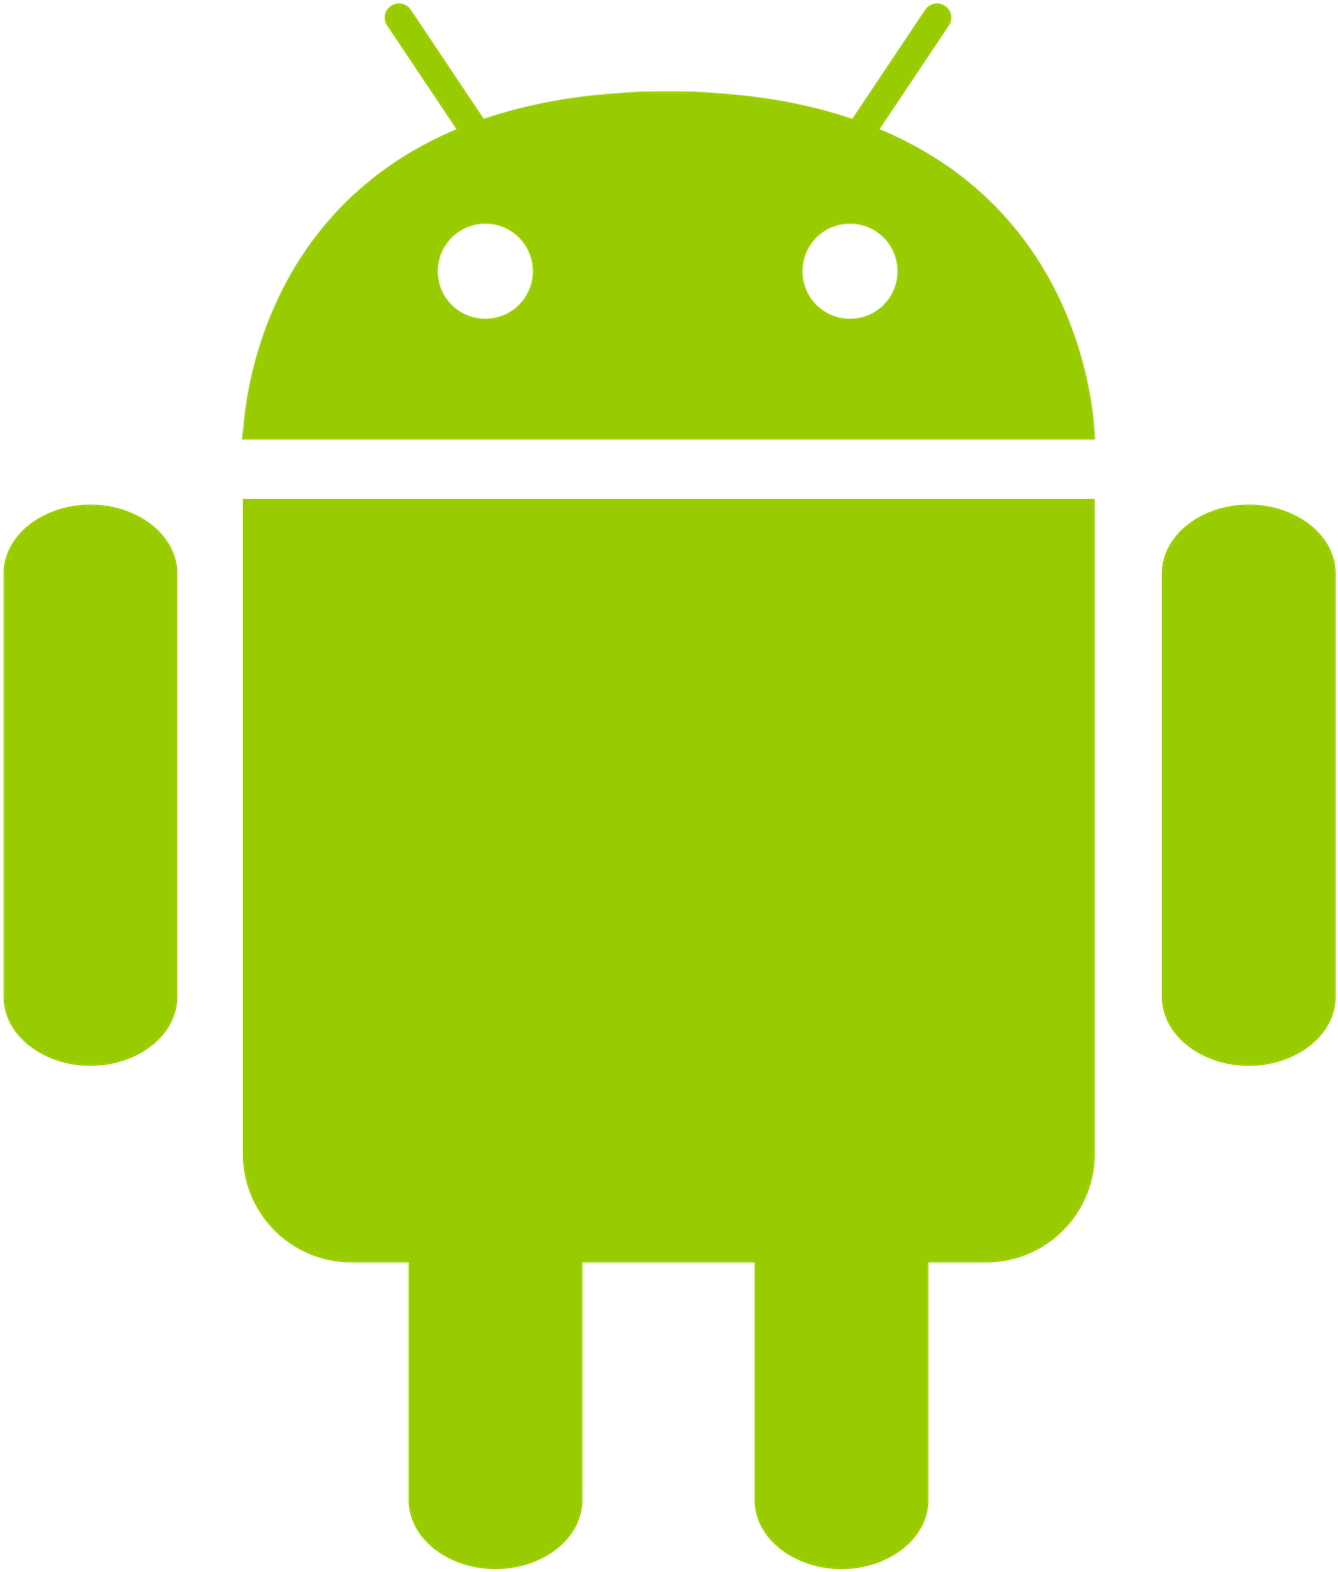 Image Image Image - Android Logo Png (1600x1600)